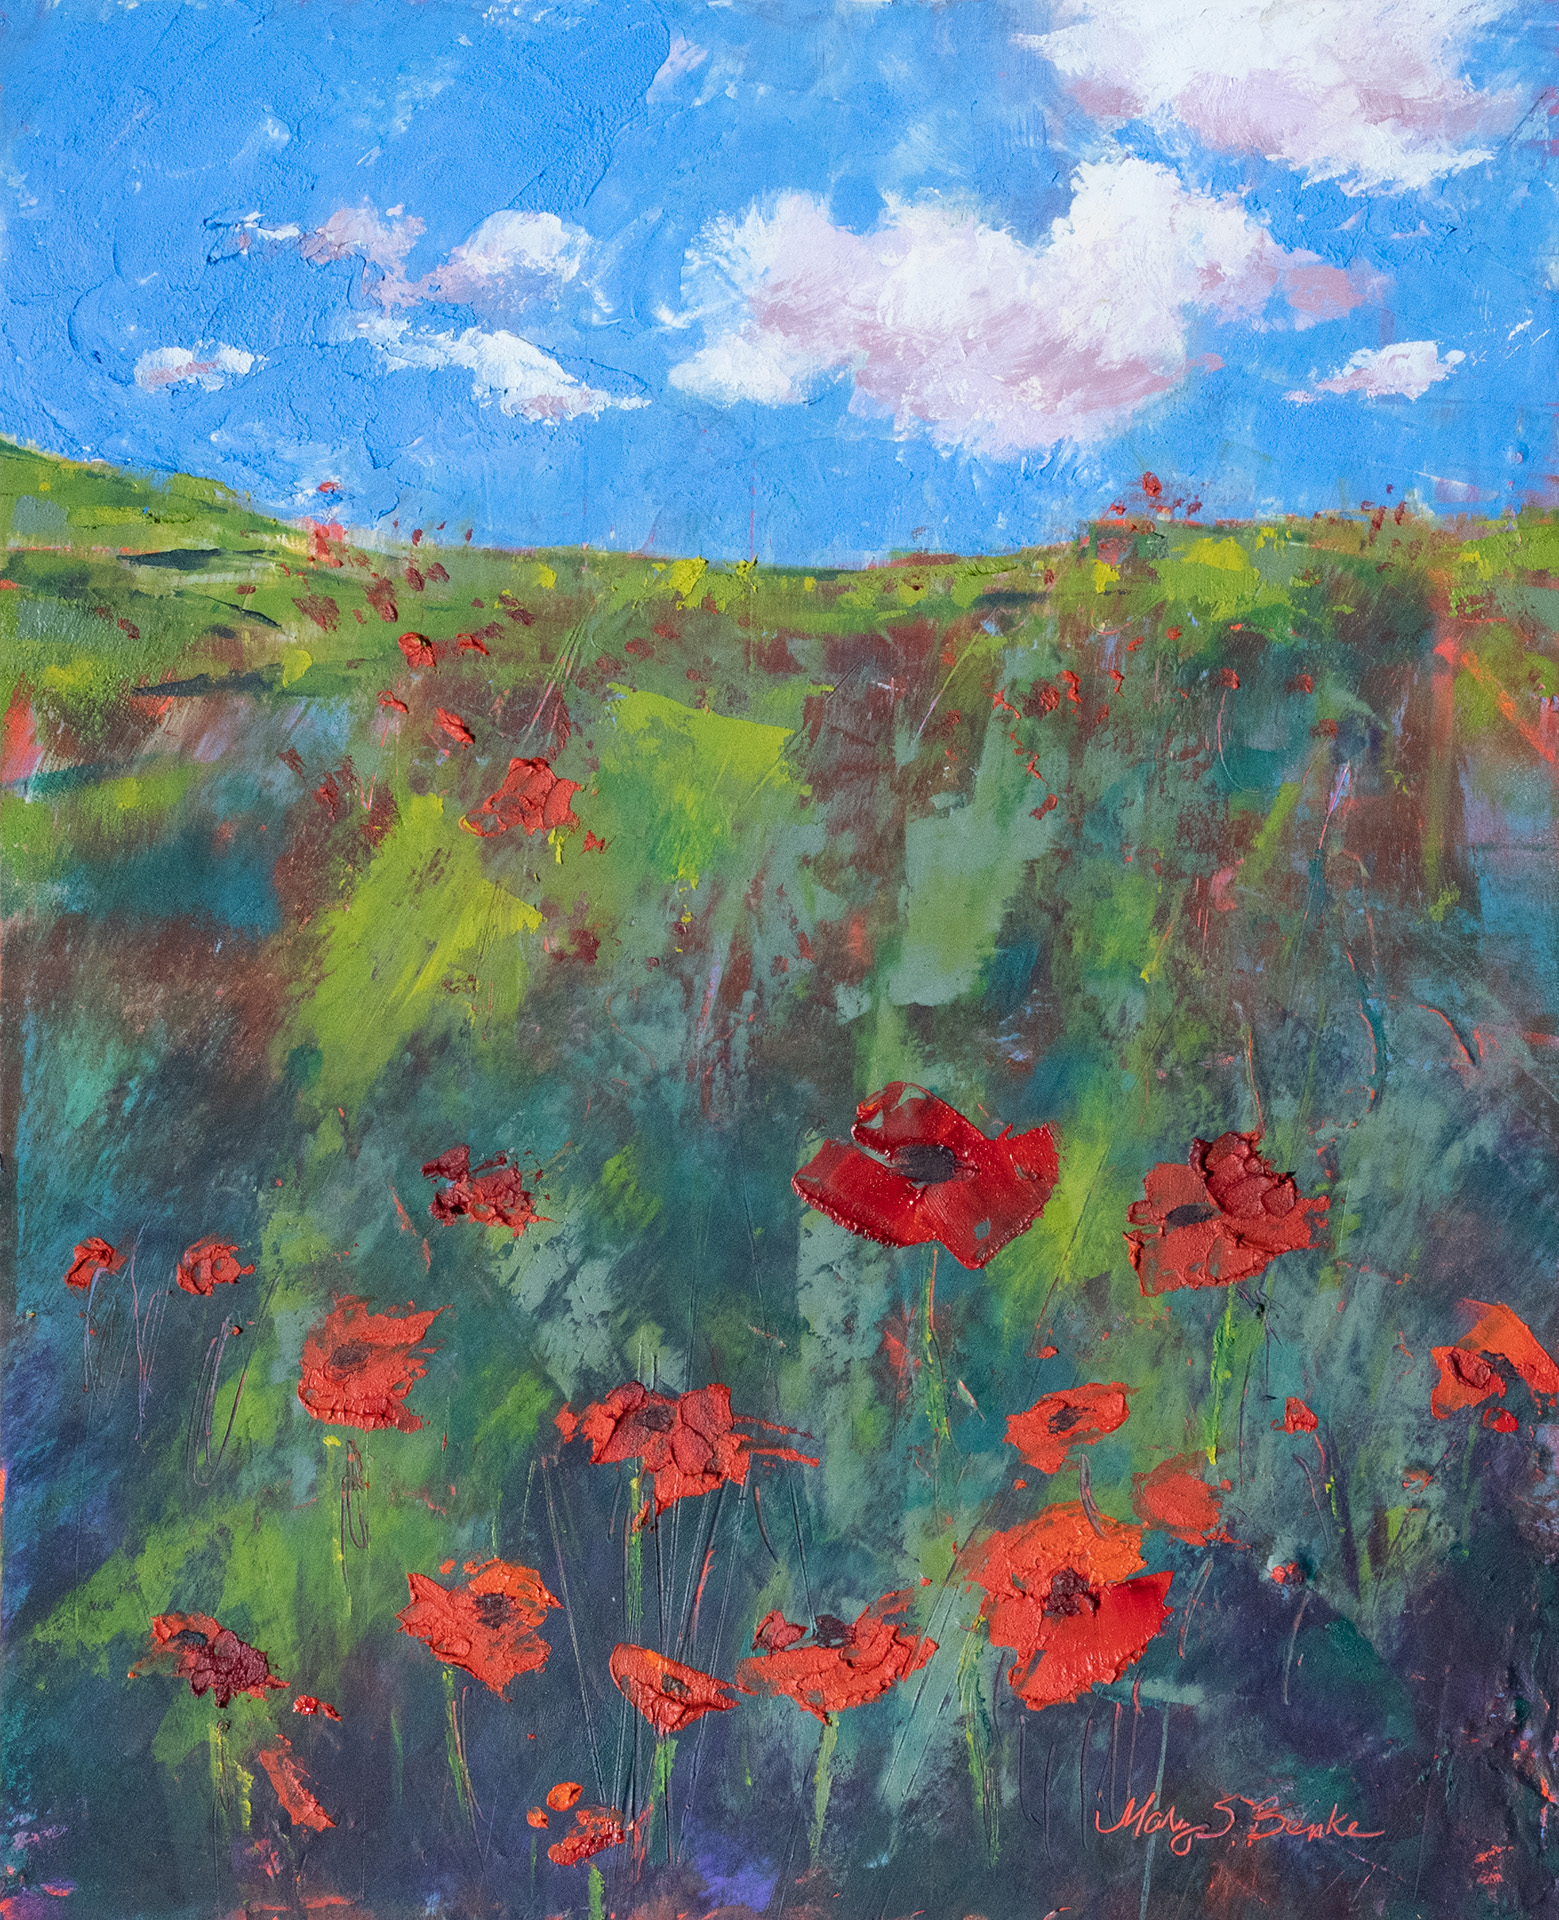 A cheery oil painting depicts vibrant red poppies against fresh greens and a brilliant blue sky by Mary Benke